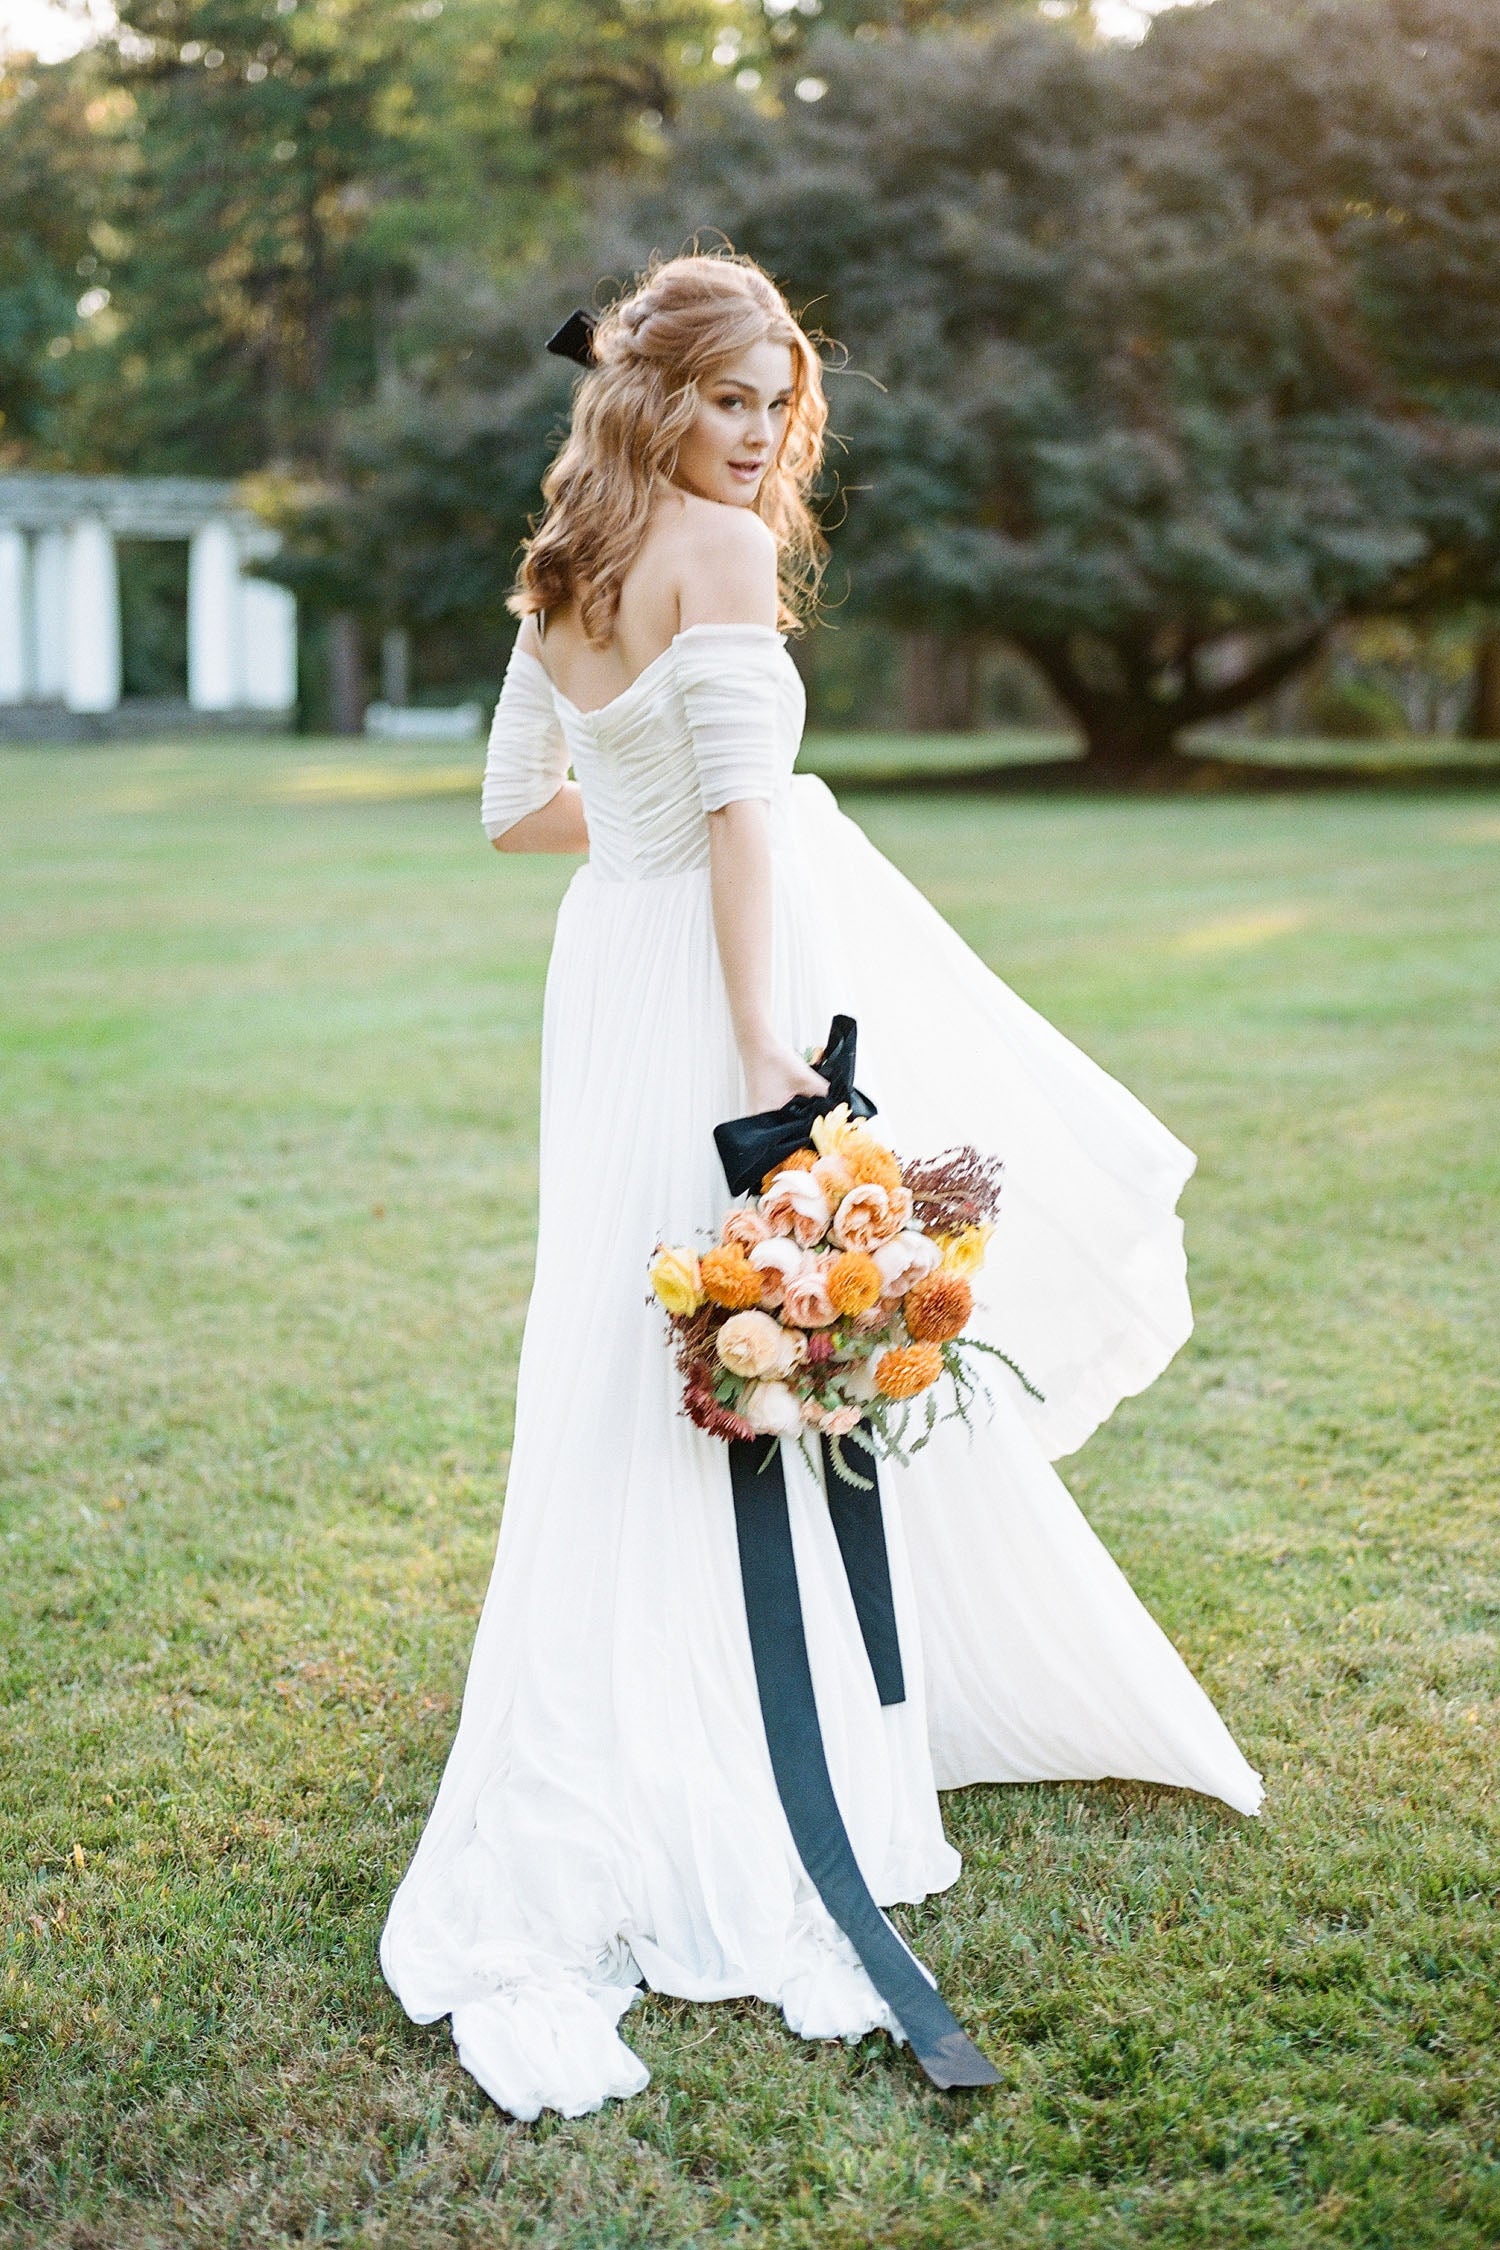 BHLDN Wtoo by Watters Miles Gown